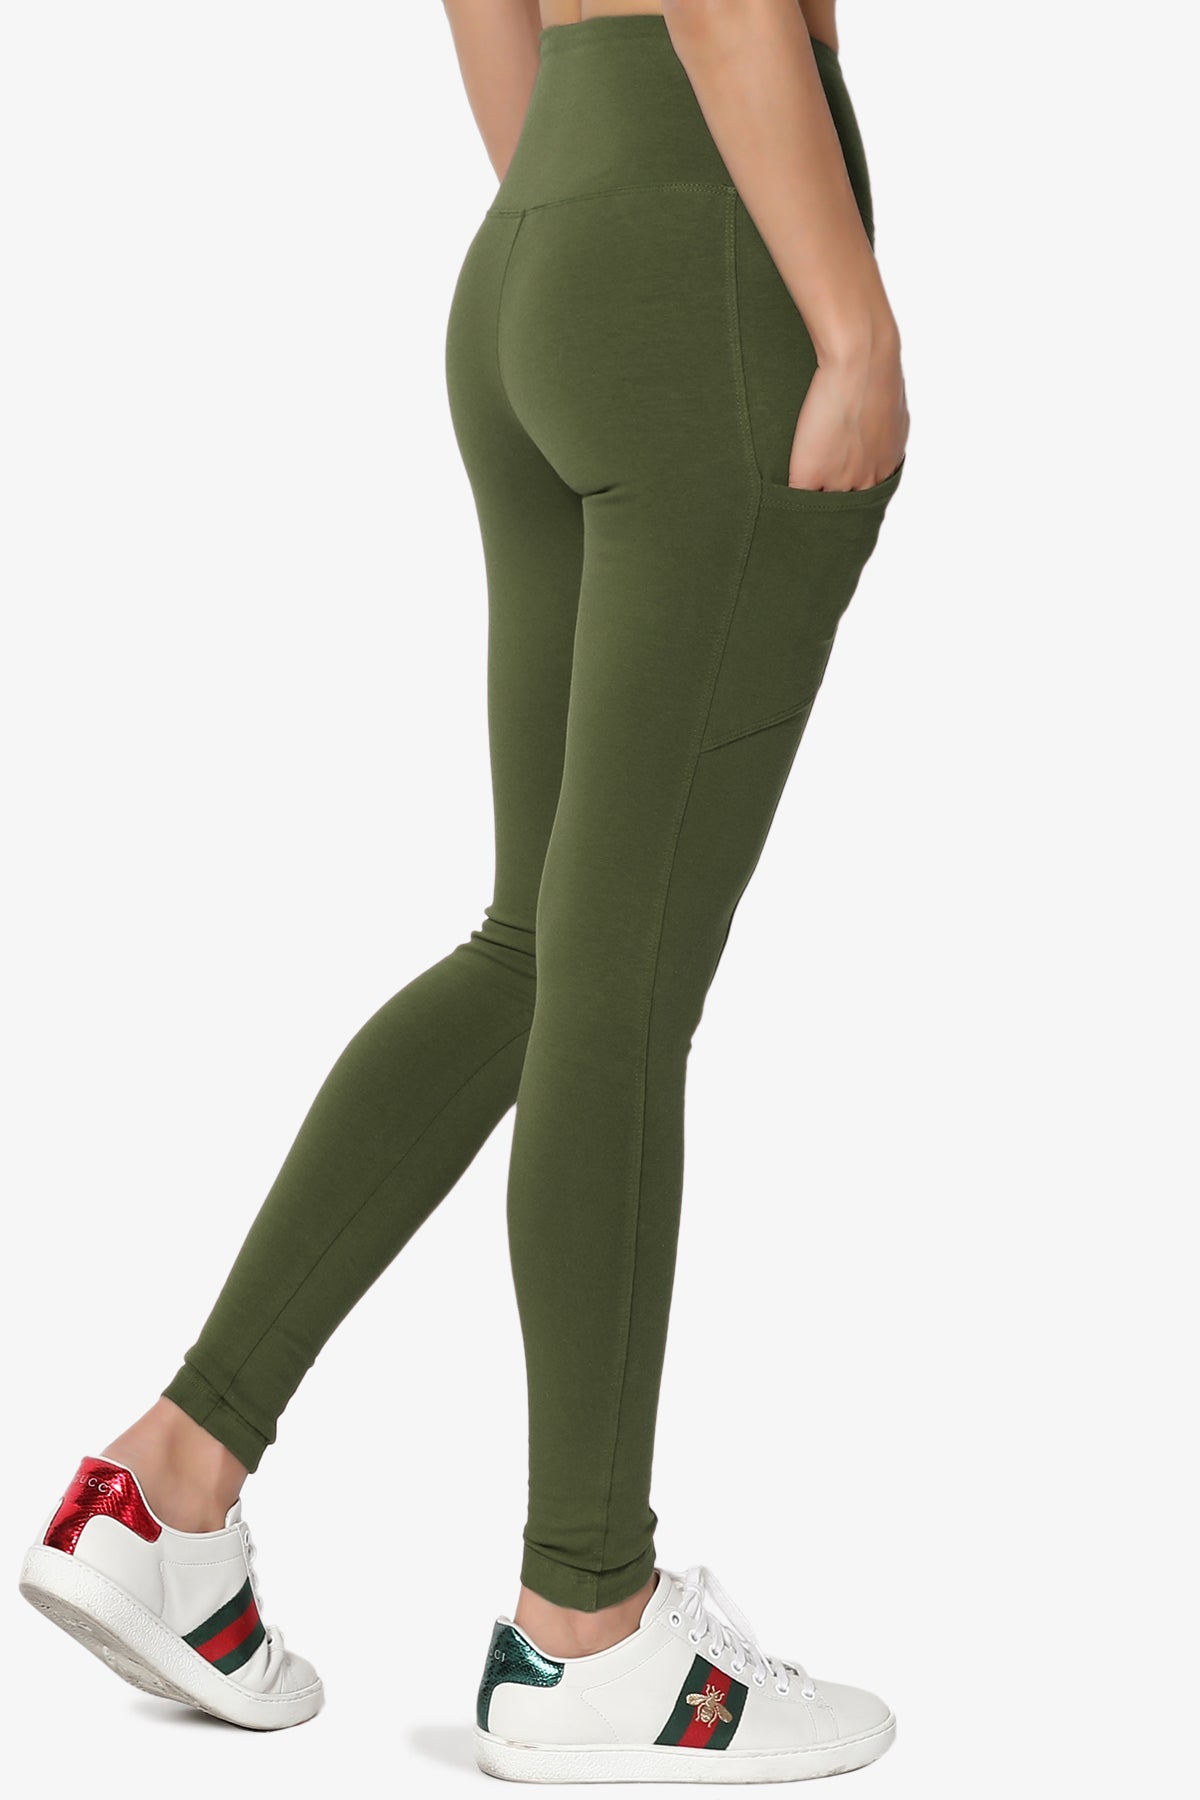 Ansley Luxe Cotton Leggings with Pockets ARMY GREEN_4